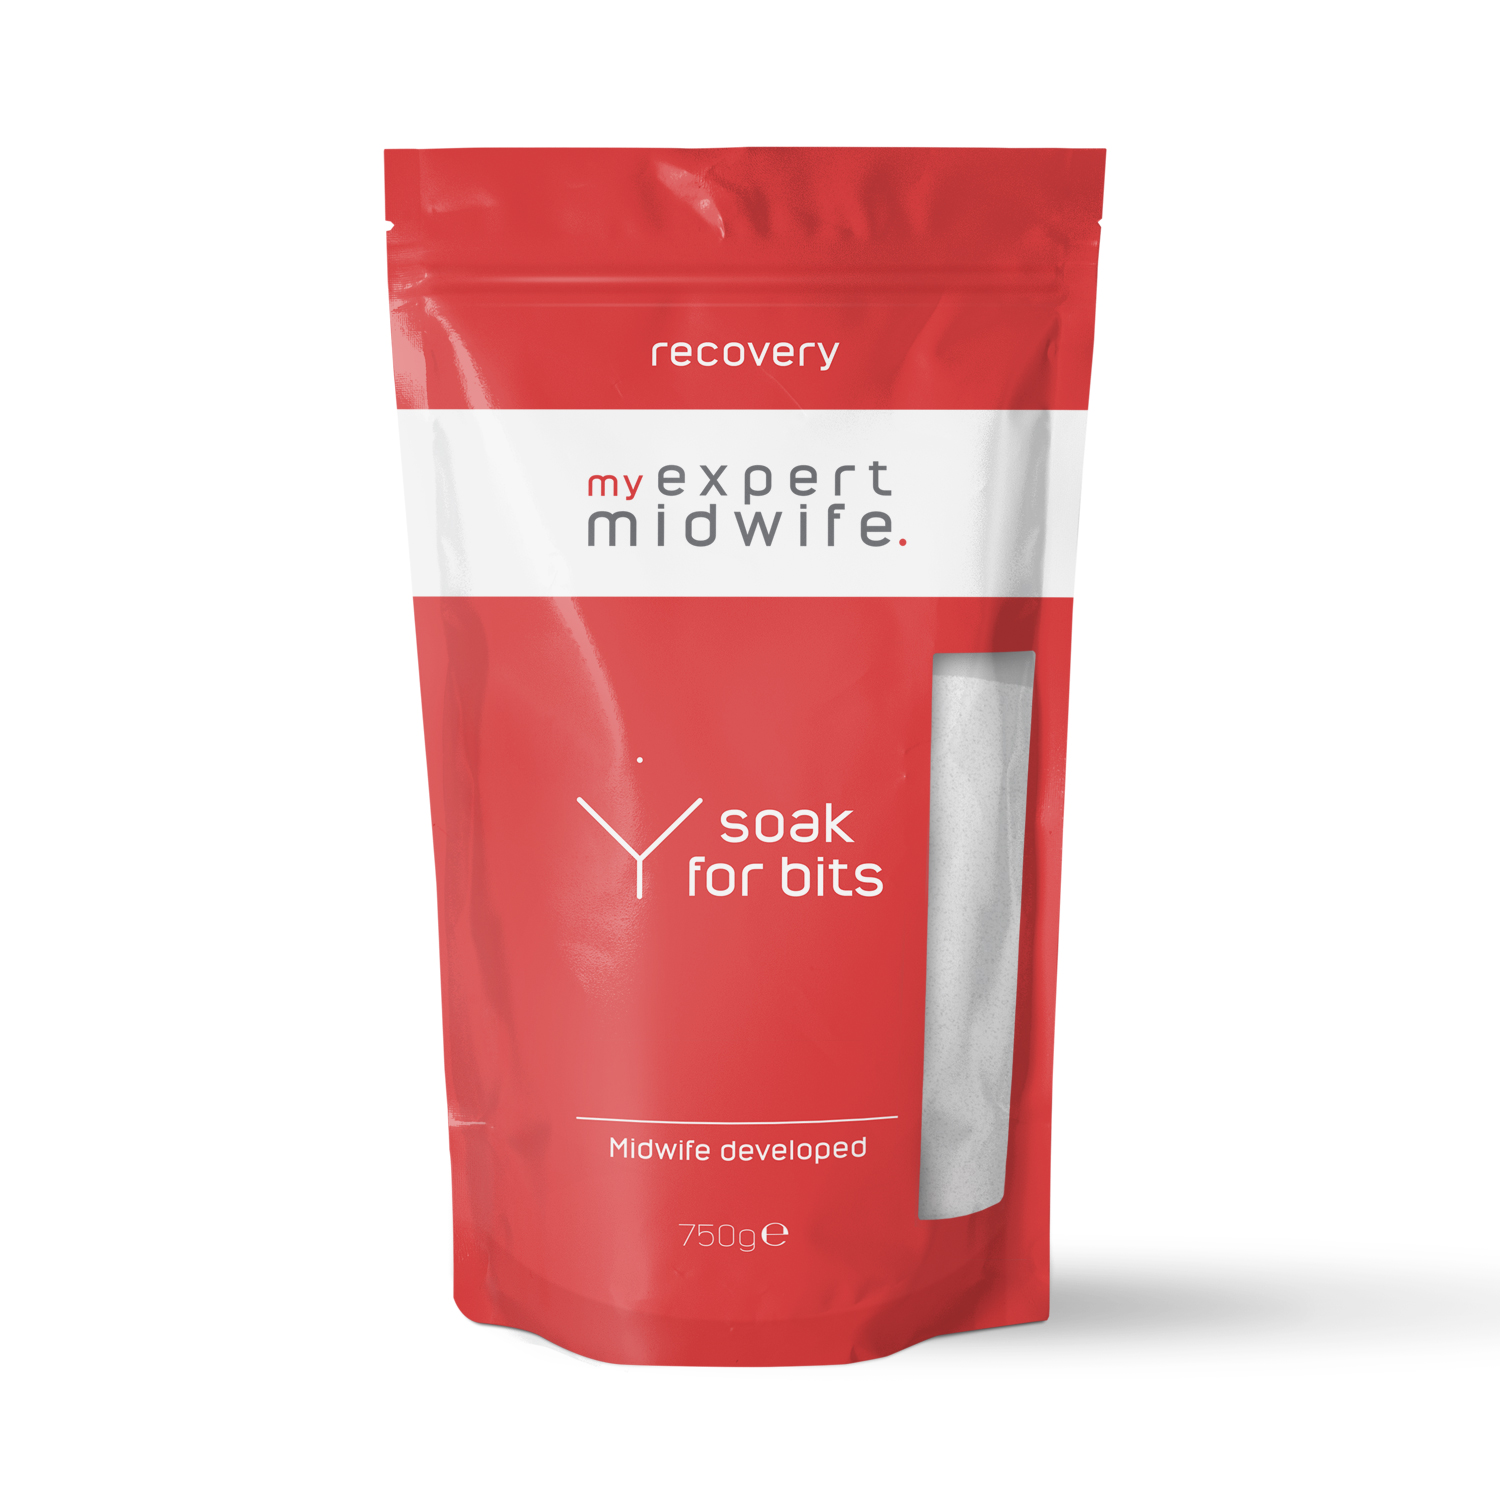 My Expert Midwife Soak for Bits, 750g